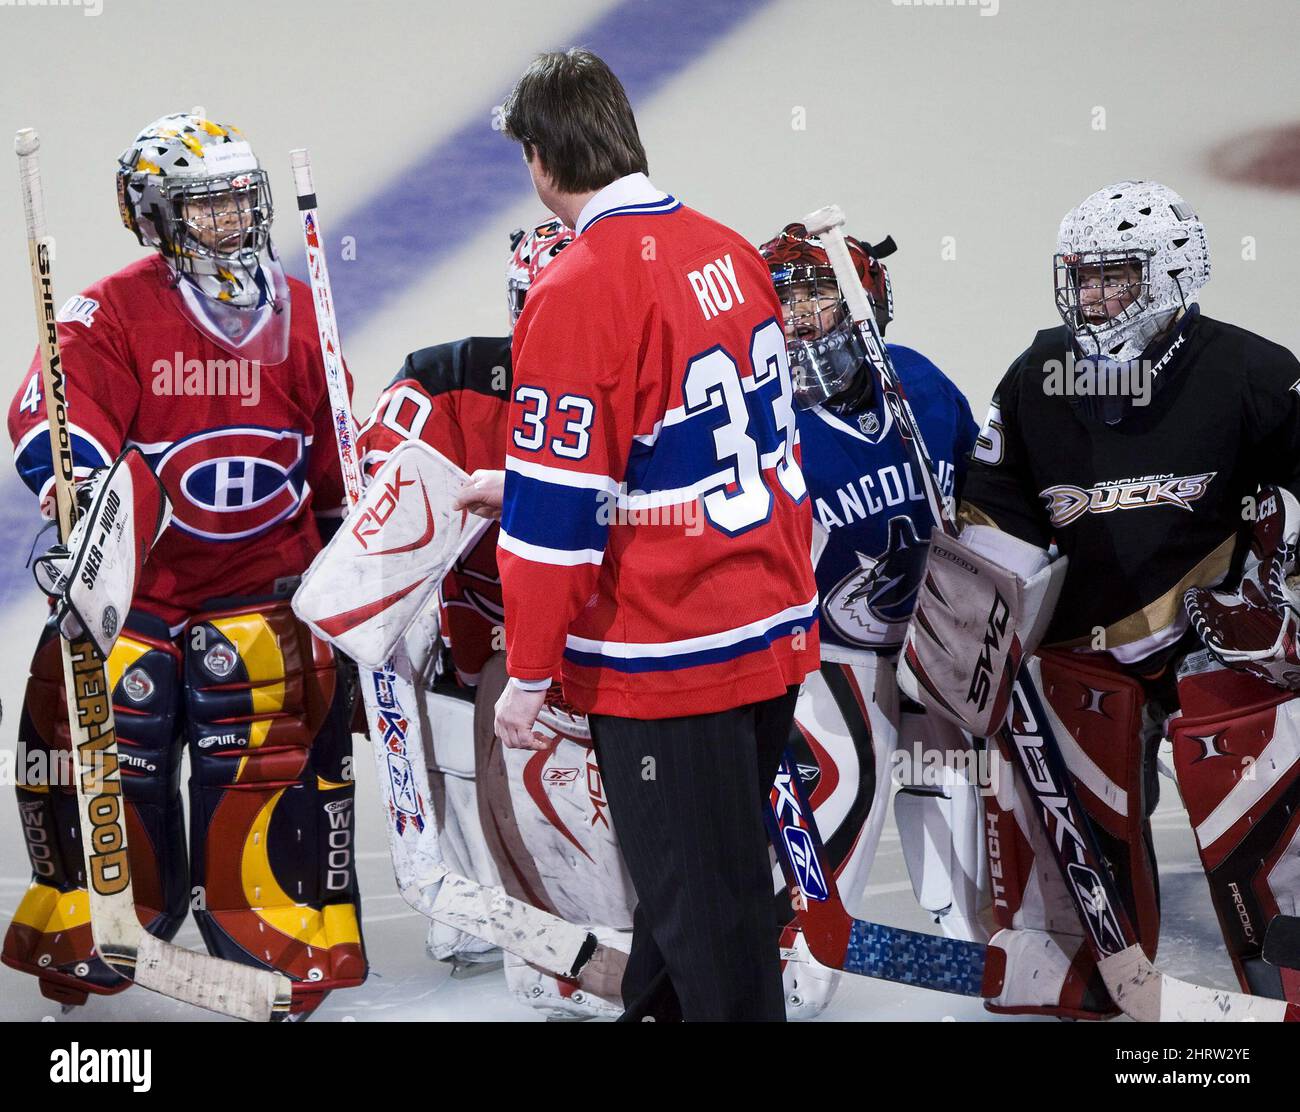 Former Montreal Canadiens goalie Patrick Roy, left, stands with